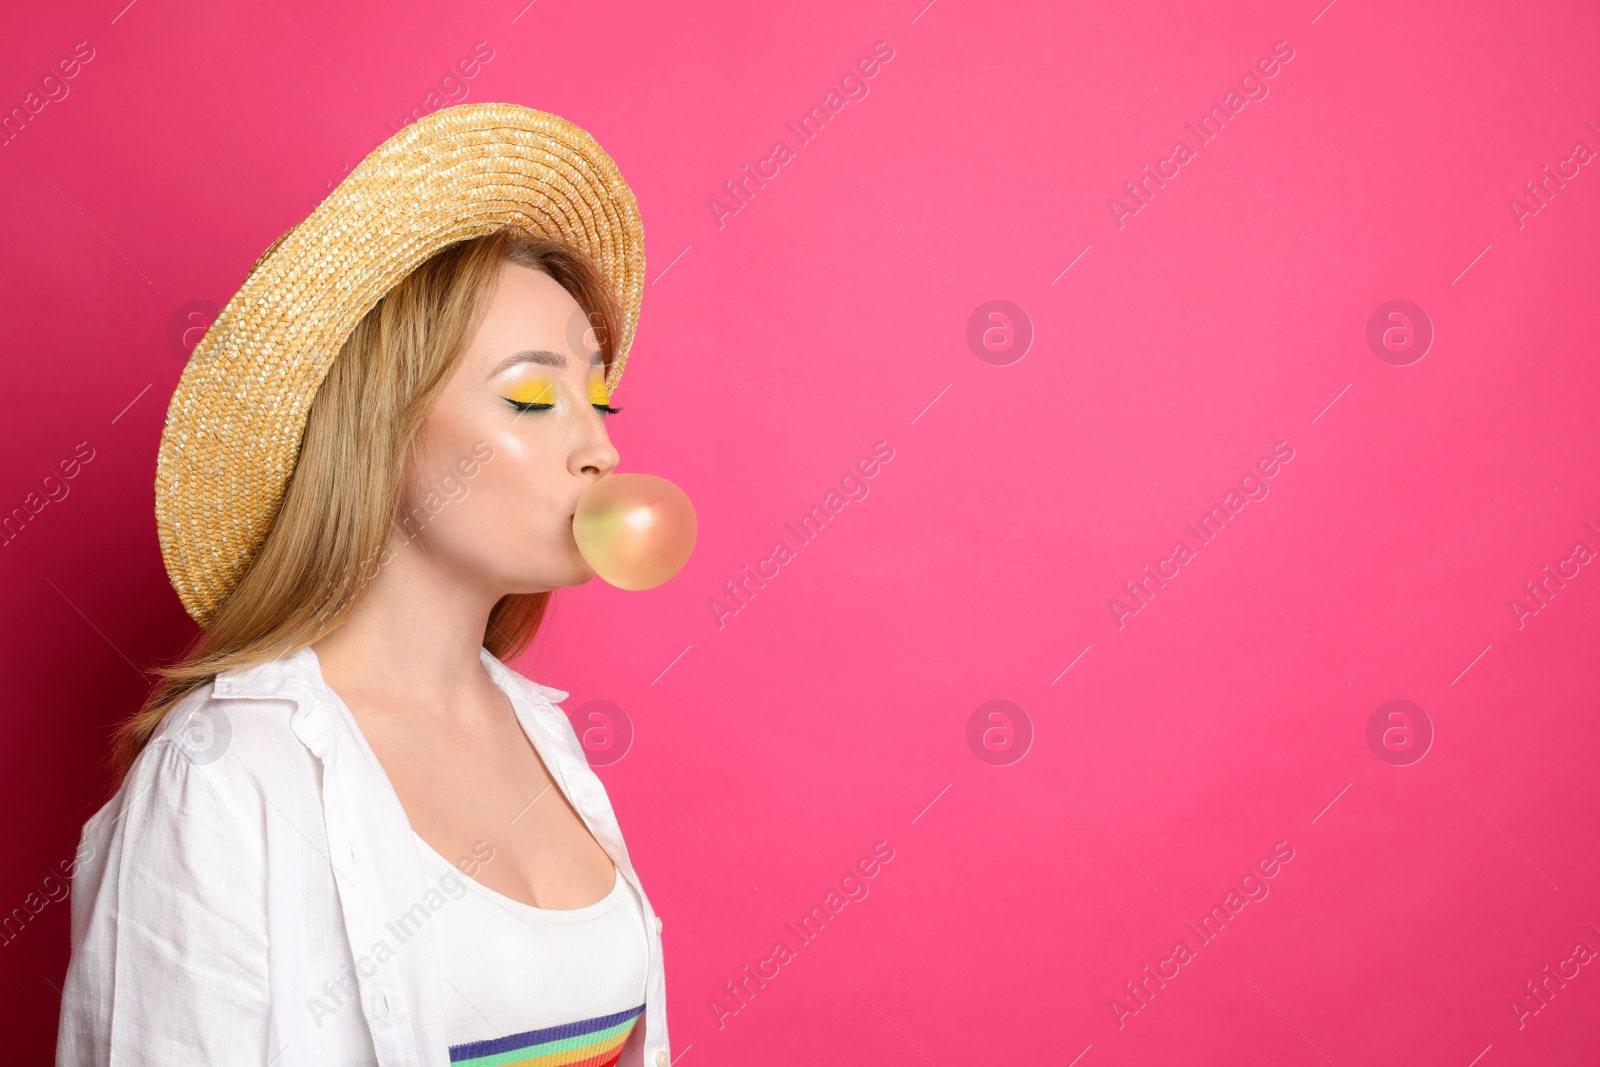 Photo of Fashionable young woman with bright makeup blowing bubblegum on pink background, space for text